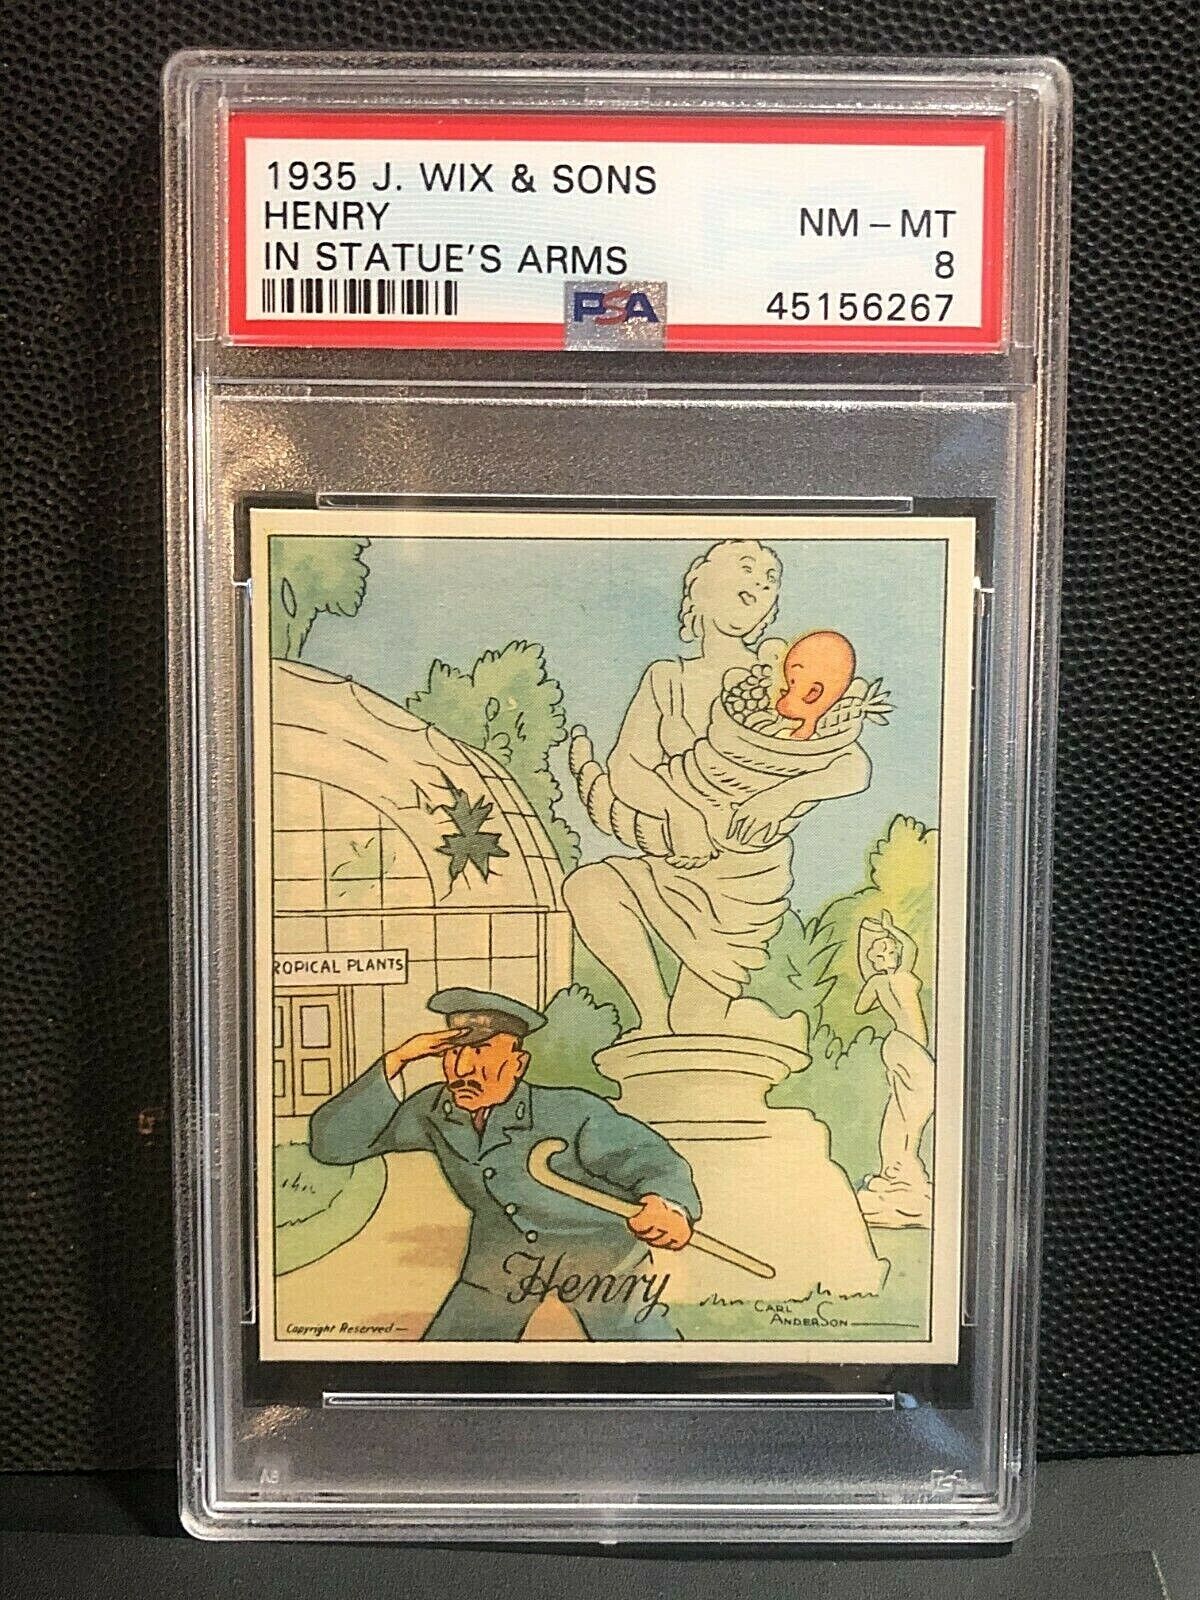 Henry in Statue\'s Arms 1935 J. Wix & Sons Tobacco Card Graded PSA 8 NM-MT